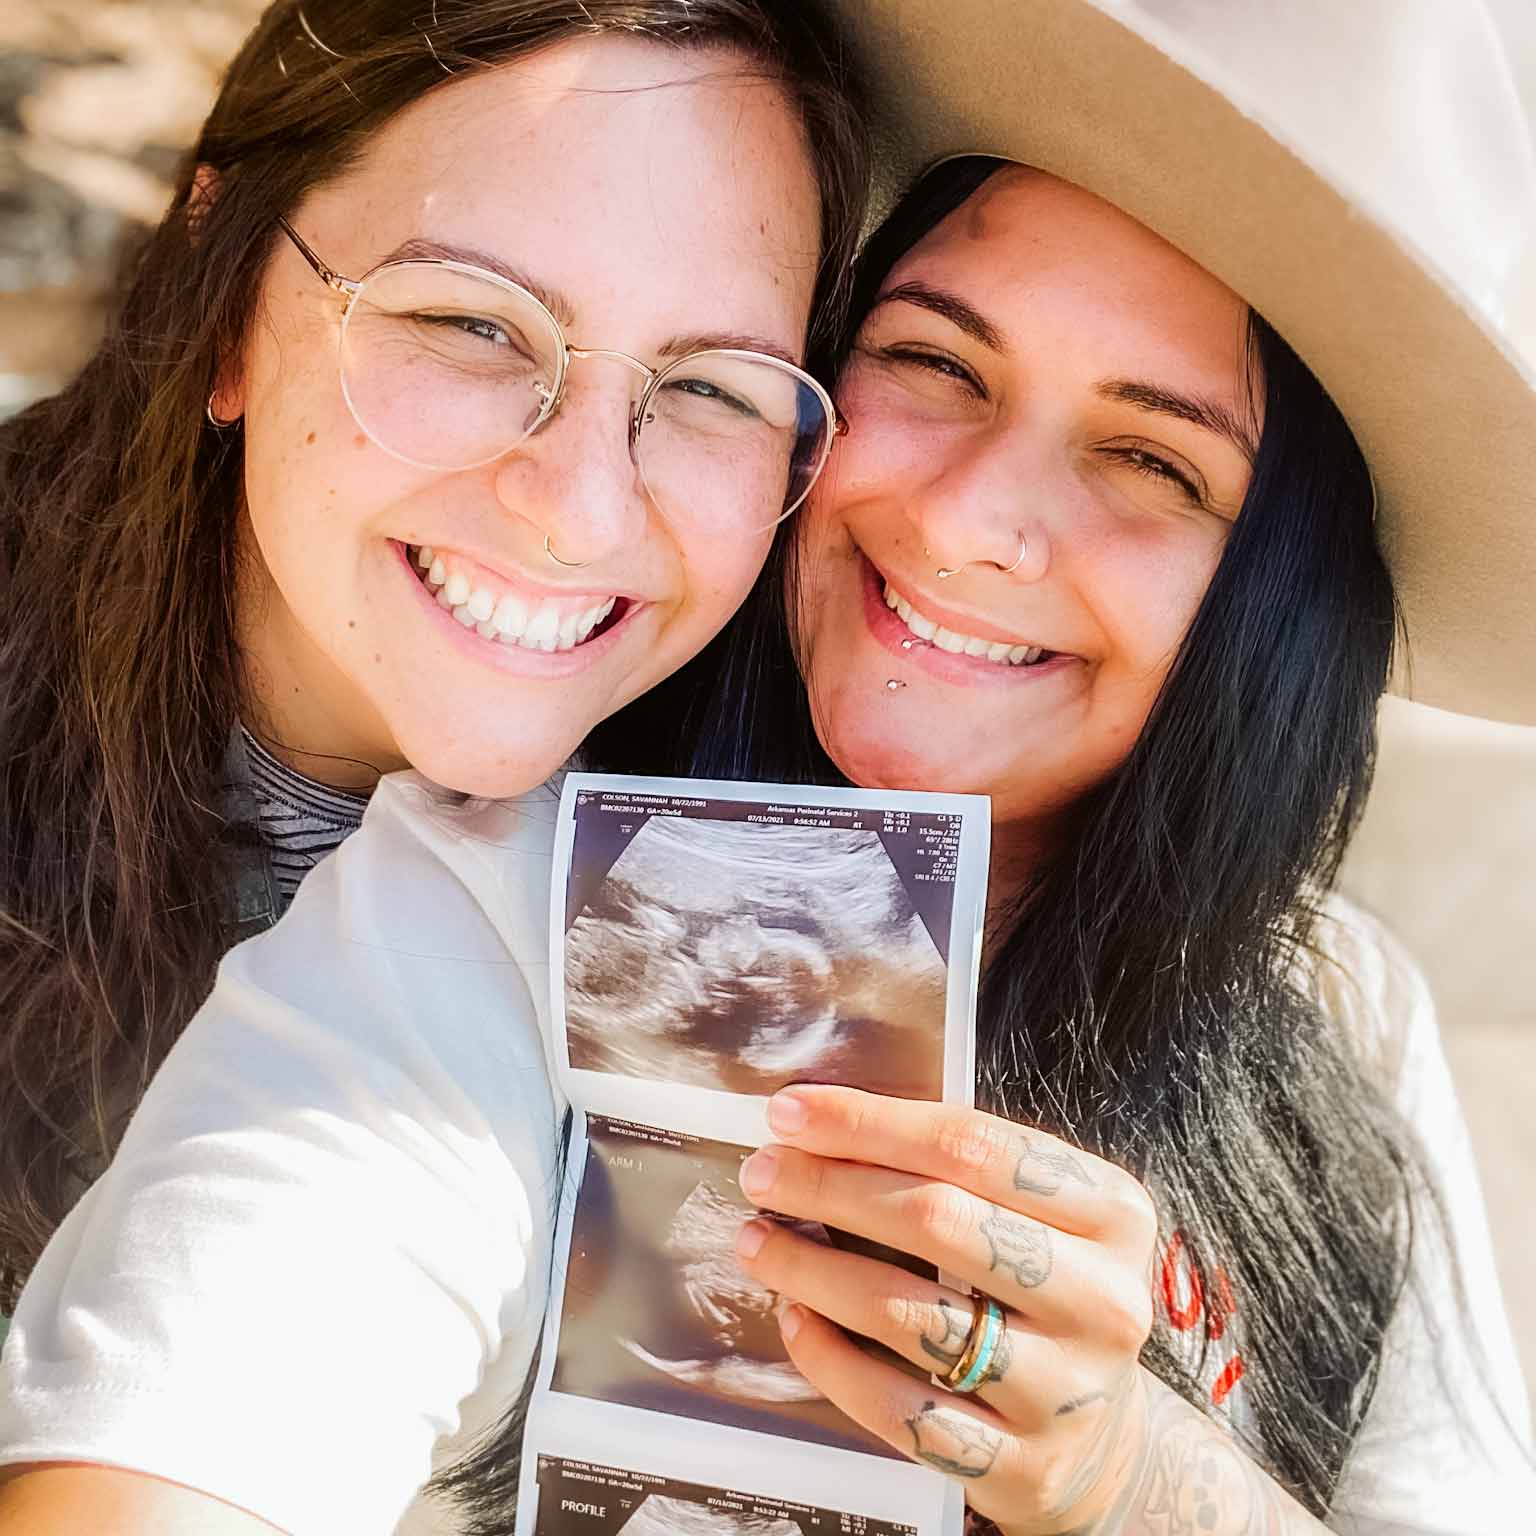 Mosie Mamas-to-be share pregnancy announcement with sonogram with bright smiles!